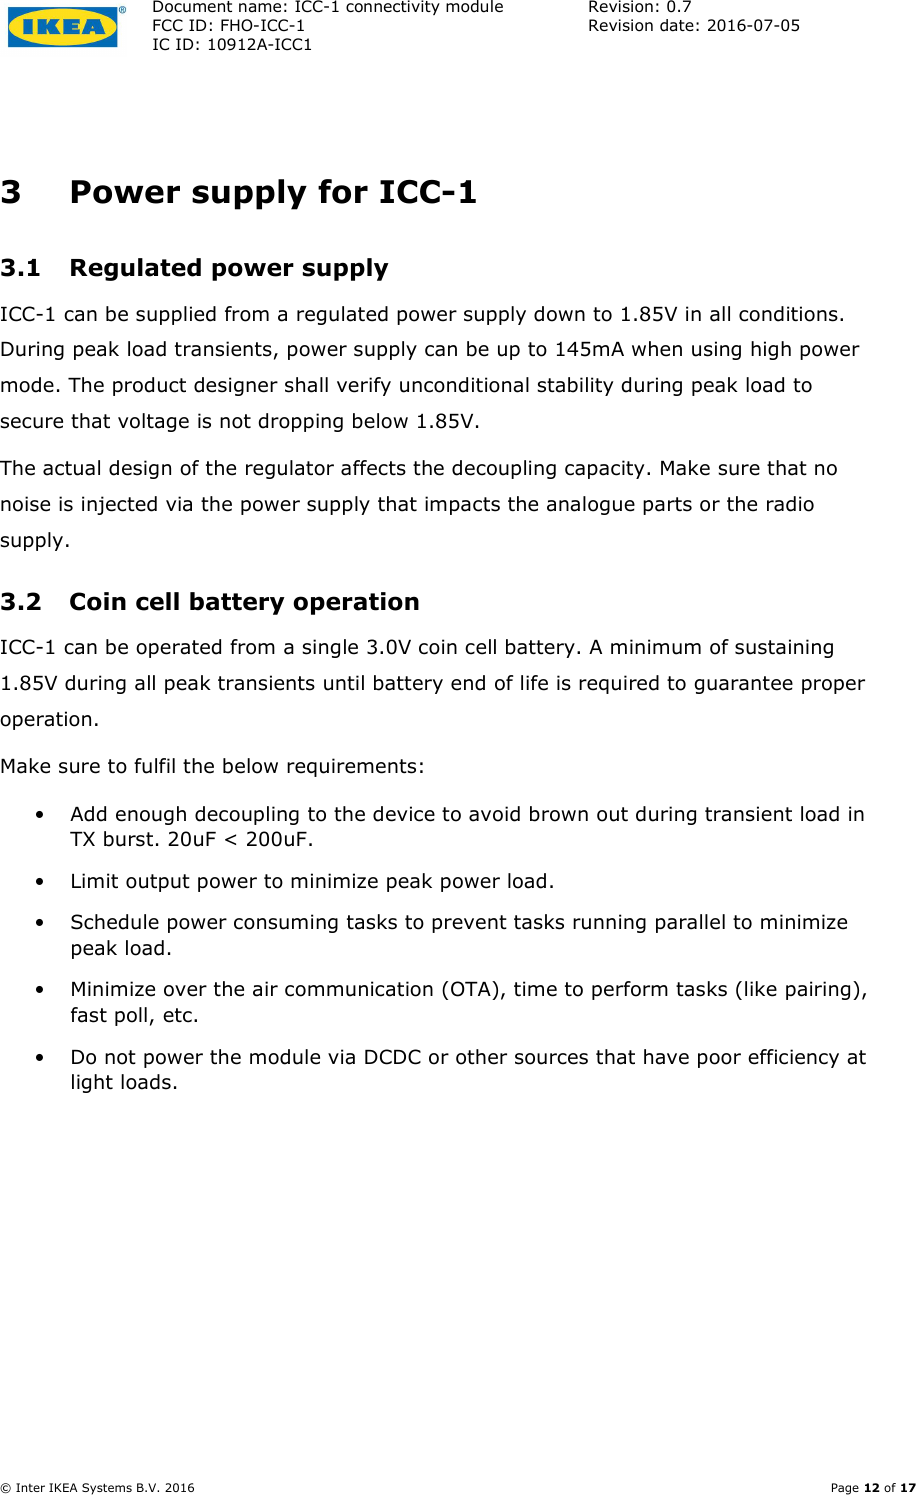 Document name: ICC-1 connectivity module  Revision: 0.7 FCC ID: FHO-ICC-1  Revision date: 2016-07-05  IC ID: 10912A-ICC1     © Inter IKEA Systems B.V. 2016    Page 12 of 17  3 Power supply for ICC-1 3.1 Regulated power supply ICC-1 can be supplied from a regulated power supply down to 1.85V in all conditions. During peak load transients, power supply can be up to 145mA when using high power mode. The product designer shall verify unconditional stability during peak load to secure that voltage is not dropping below 1.85V. The actual design of the regulator affects the decoupling capacity. Make sure that no noise is injected via the power supply that impacts the analogue parts or the radio supply. 3.2 Coin cell battery operation ICC-1 can be operated from a single 3.0V coin cell battery. A minimum of sustaining 1.85V during all peak transients until battery end of life is required to guarantee proper operation. Make sure to fulfil the below requirements:  • Add enough decoupling to the device to avoid brown out during transient load in TX burst. 20uF &lt; 200uF. • Limit output power to minimize peak power load. • Schedule power consuming tasks to prevent tasks running parallel to minimize peak load. • Minimize over the air communication (OTA), time to perform tasks (like pairing), fast poll, etc. • Do not power the module via DCDC or other sources that have poor efficiency at light loads.   